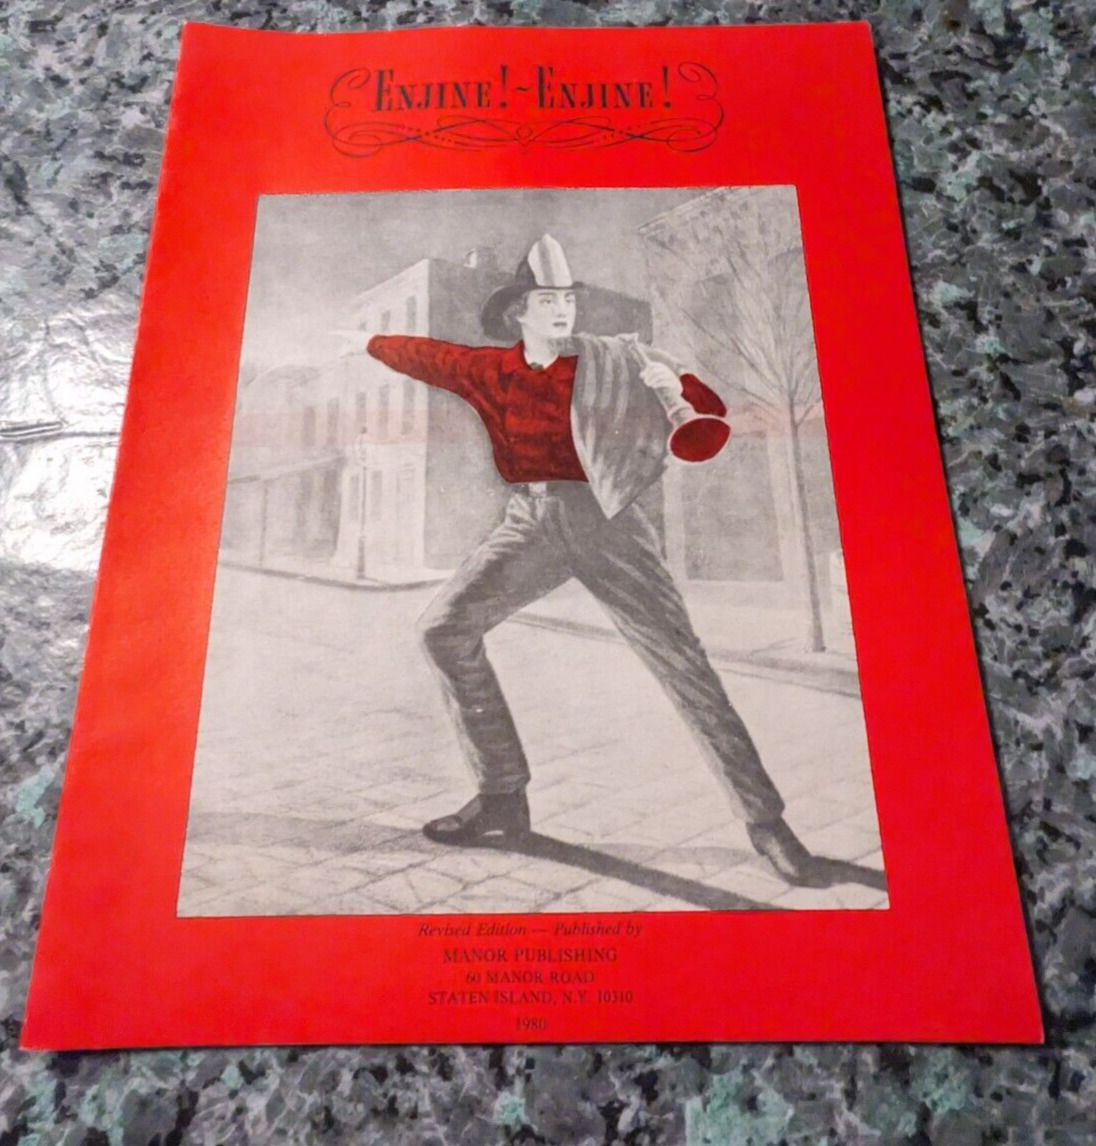 Enjine Enjine A story of Fire Protection 1980 Revised Ed Equipment History